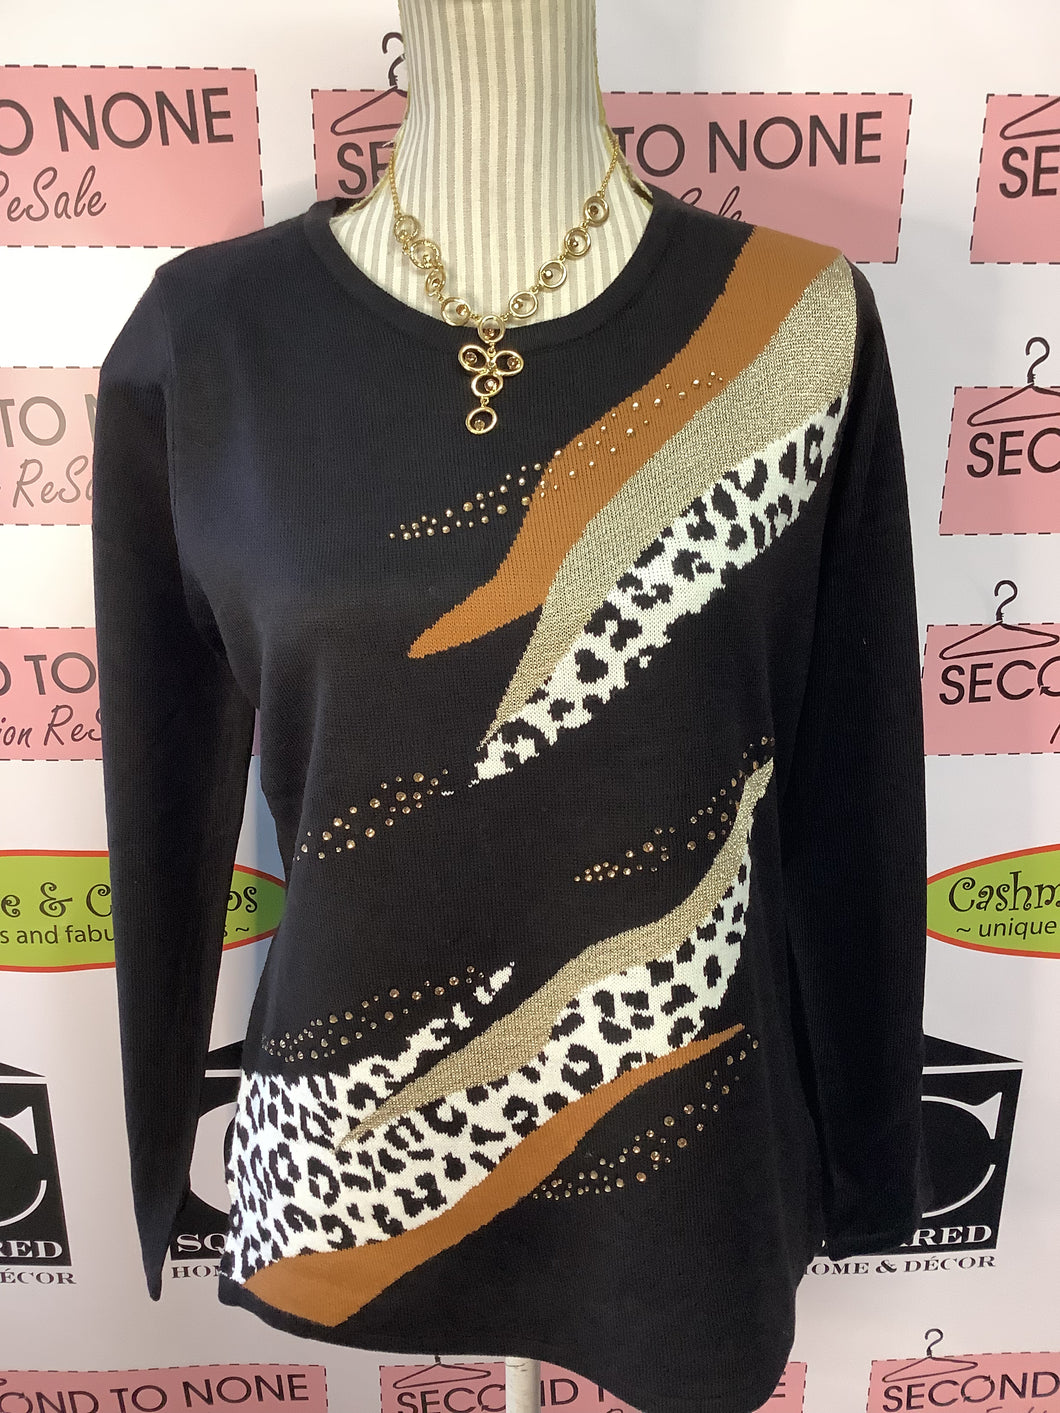 Abstract Animal Print Top (Only Black Left!)